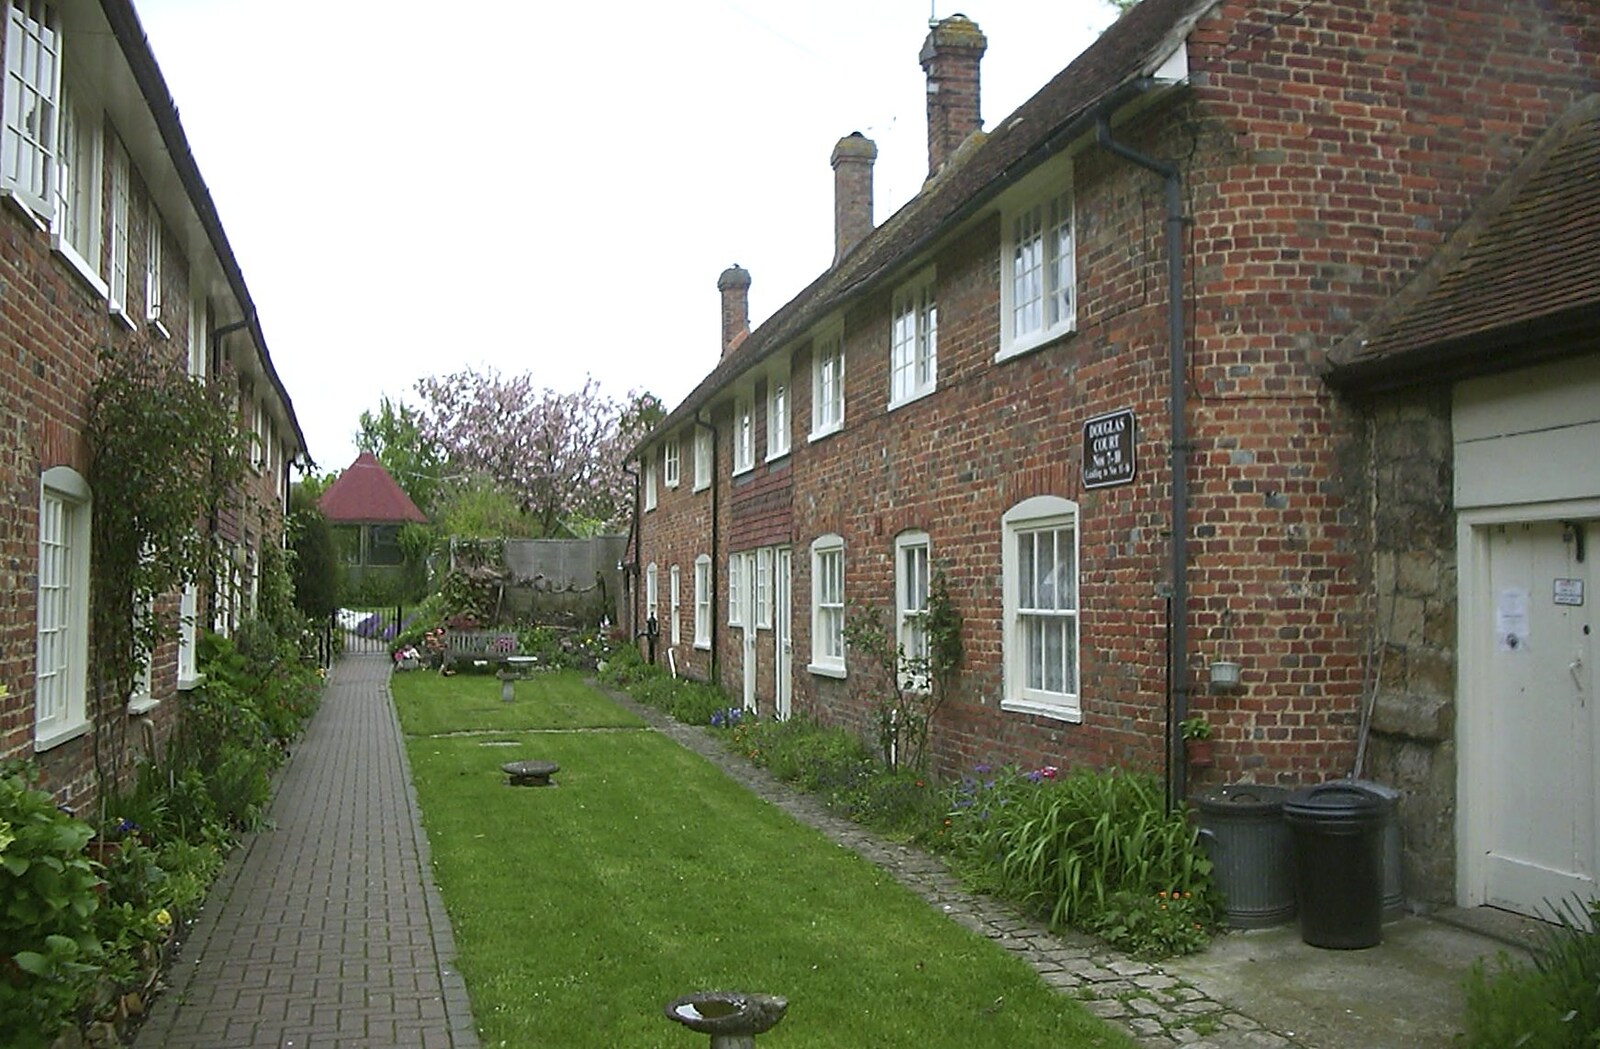 A nice little row of cottages from The BSCC Annual Bike Ride, Lenham, Kent - 8th May 2004